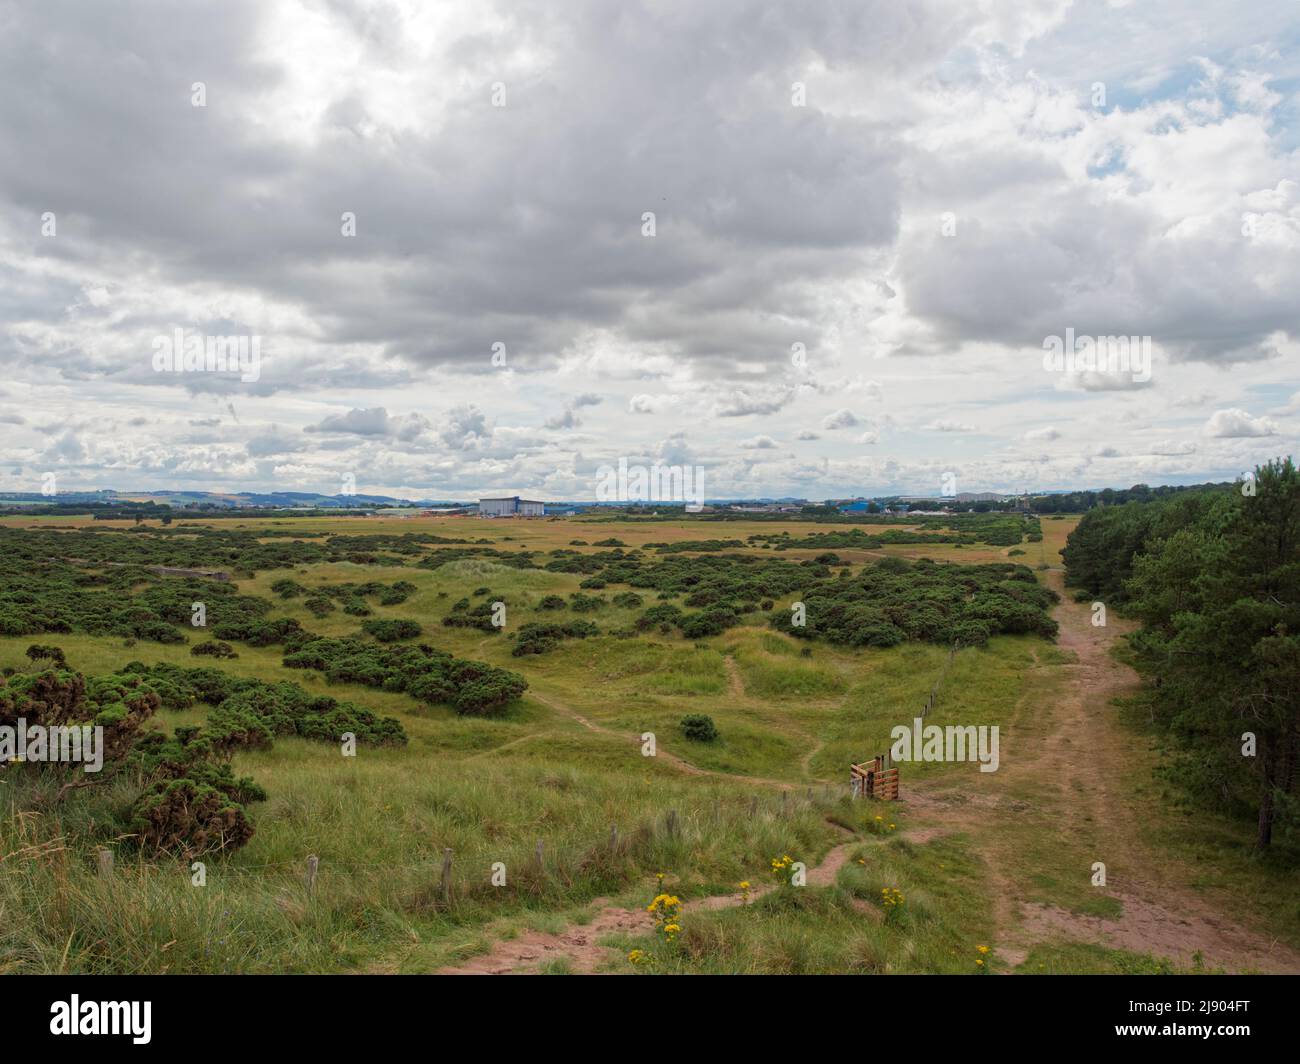 Looking back from the Top of the Dunes of Montrose Beach towards the Industrial Estate and Sewage Works, with sandy paths crossing the Heath. Stock Photo